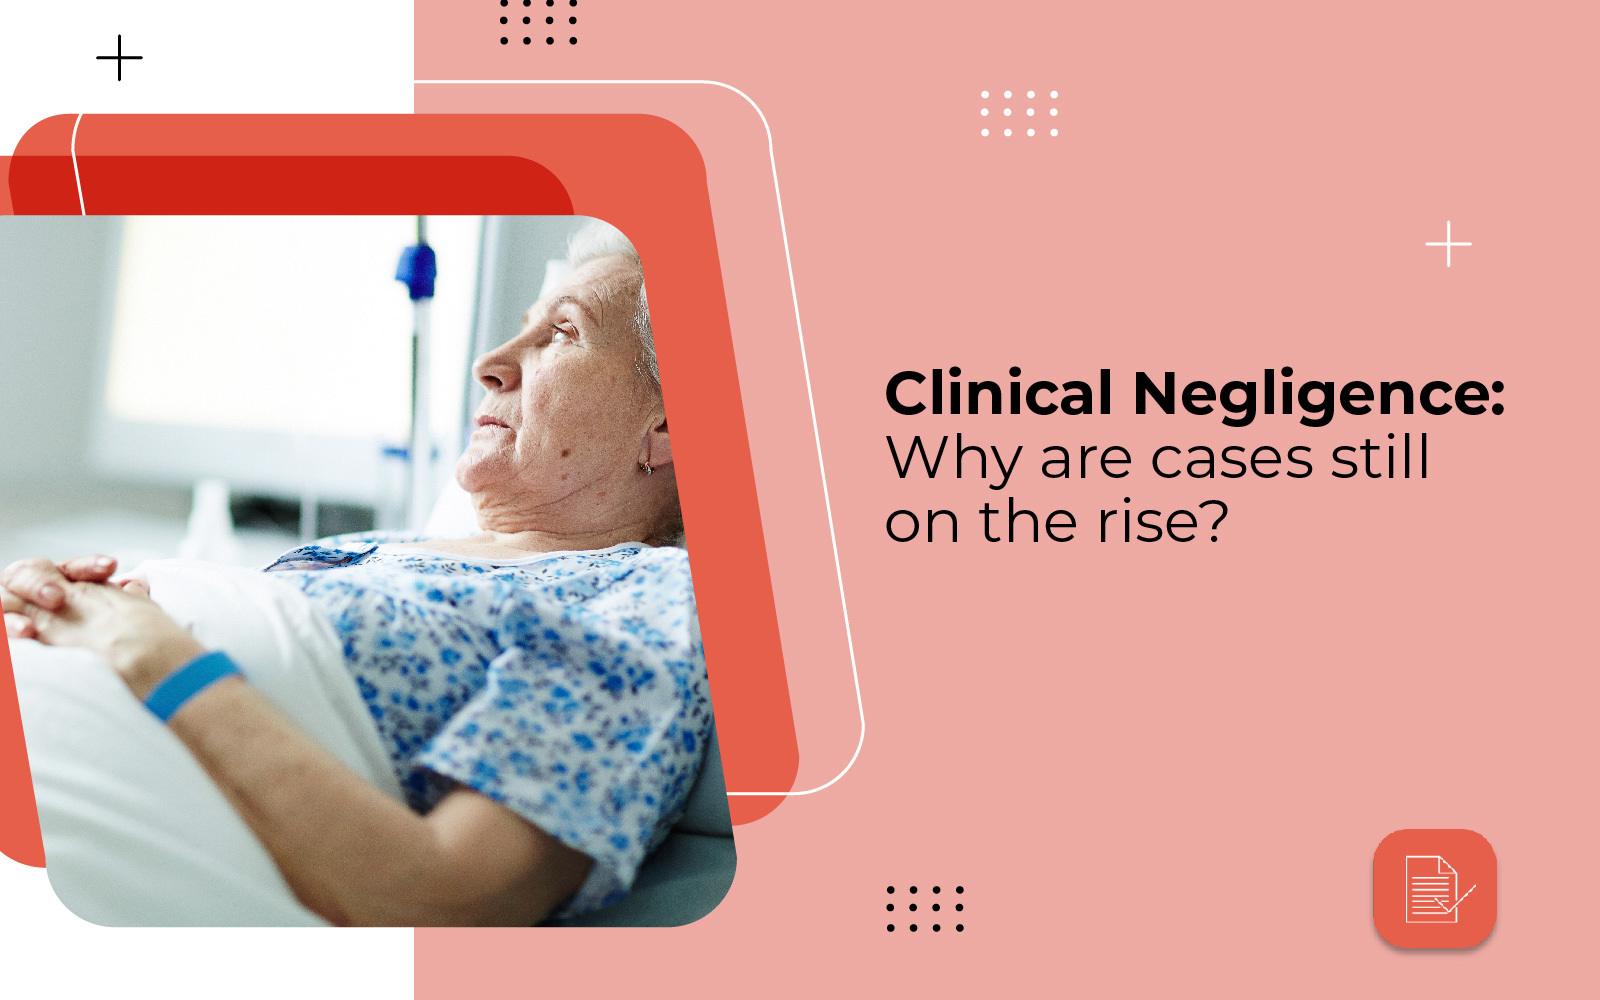 Clinical Negligence: Why are Cases Still on the Rise?